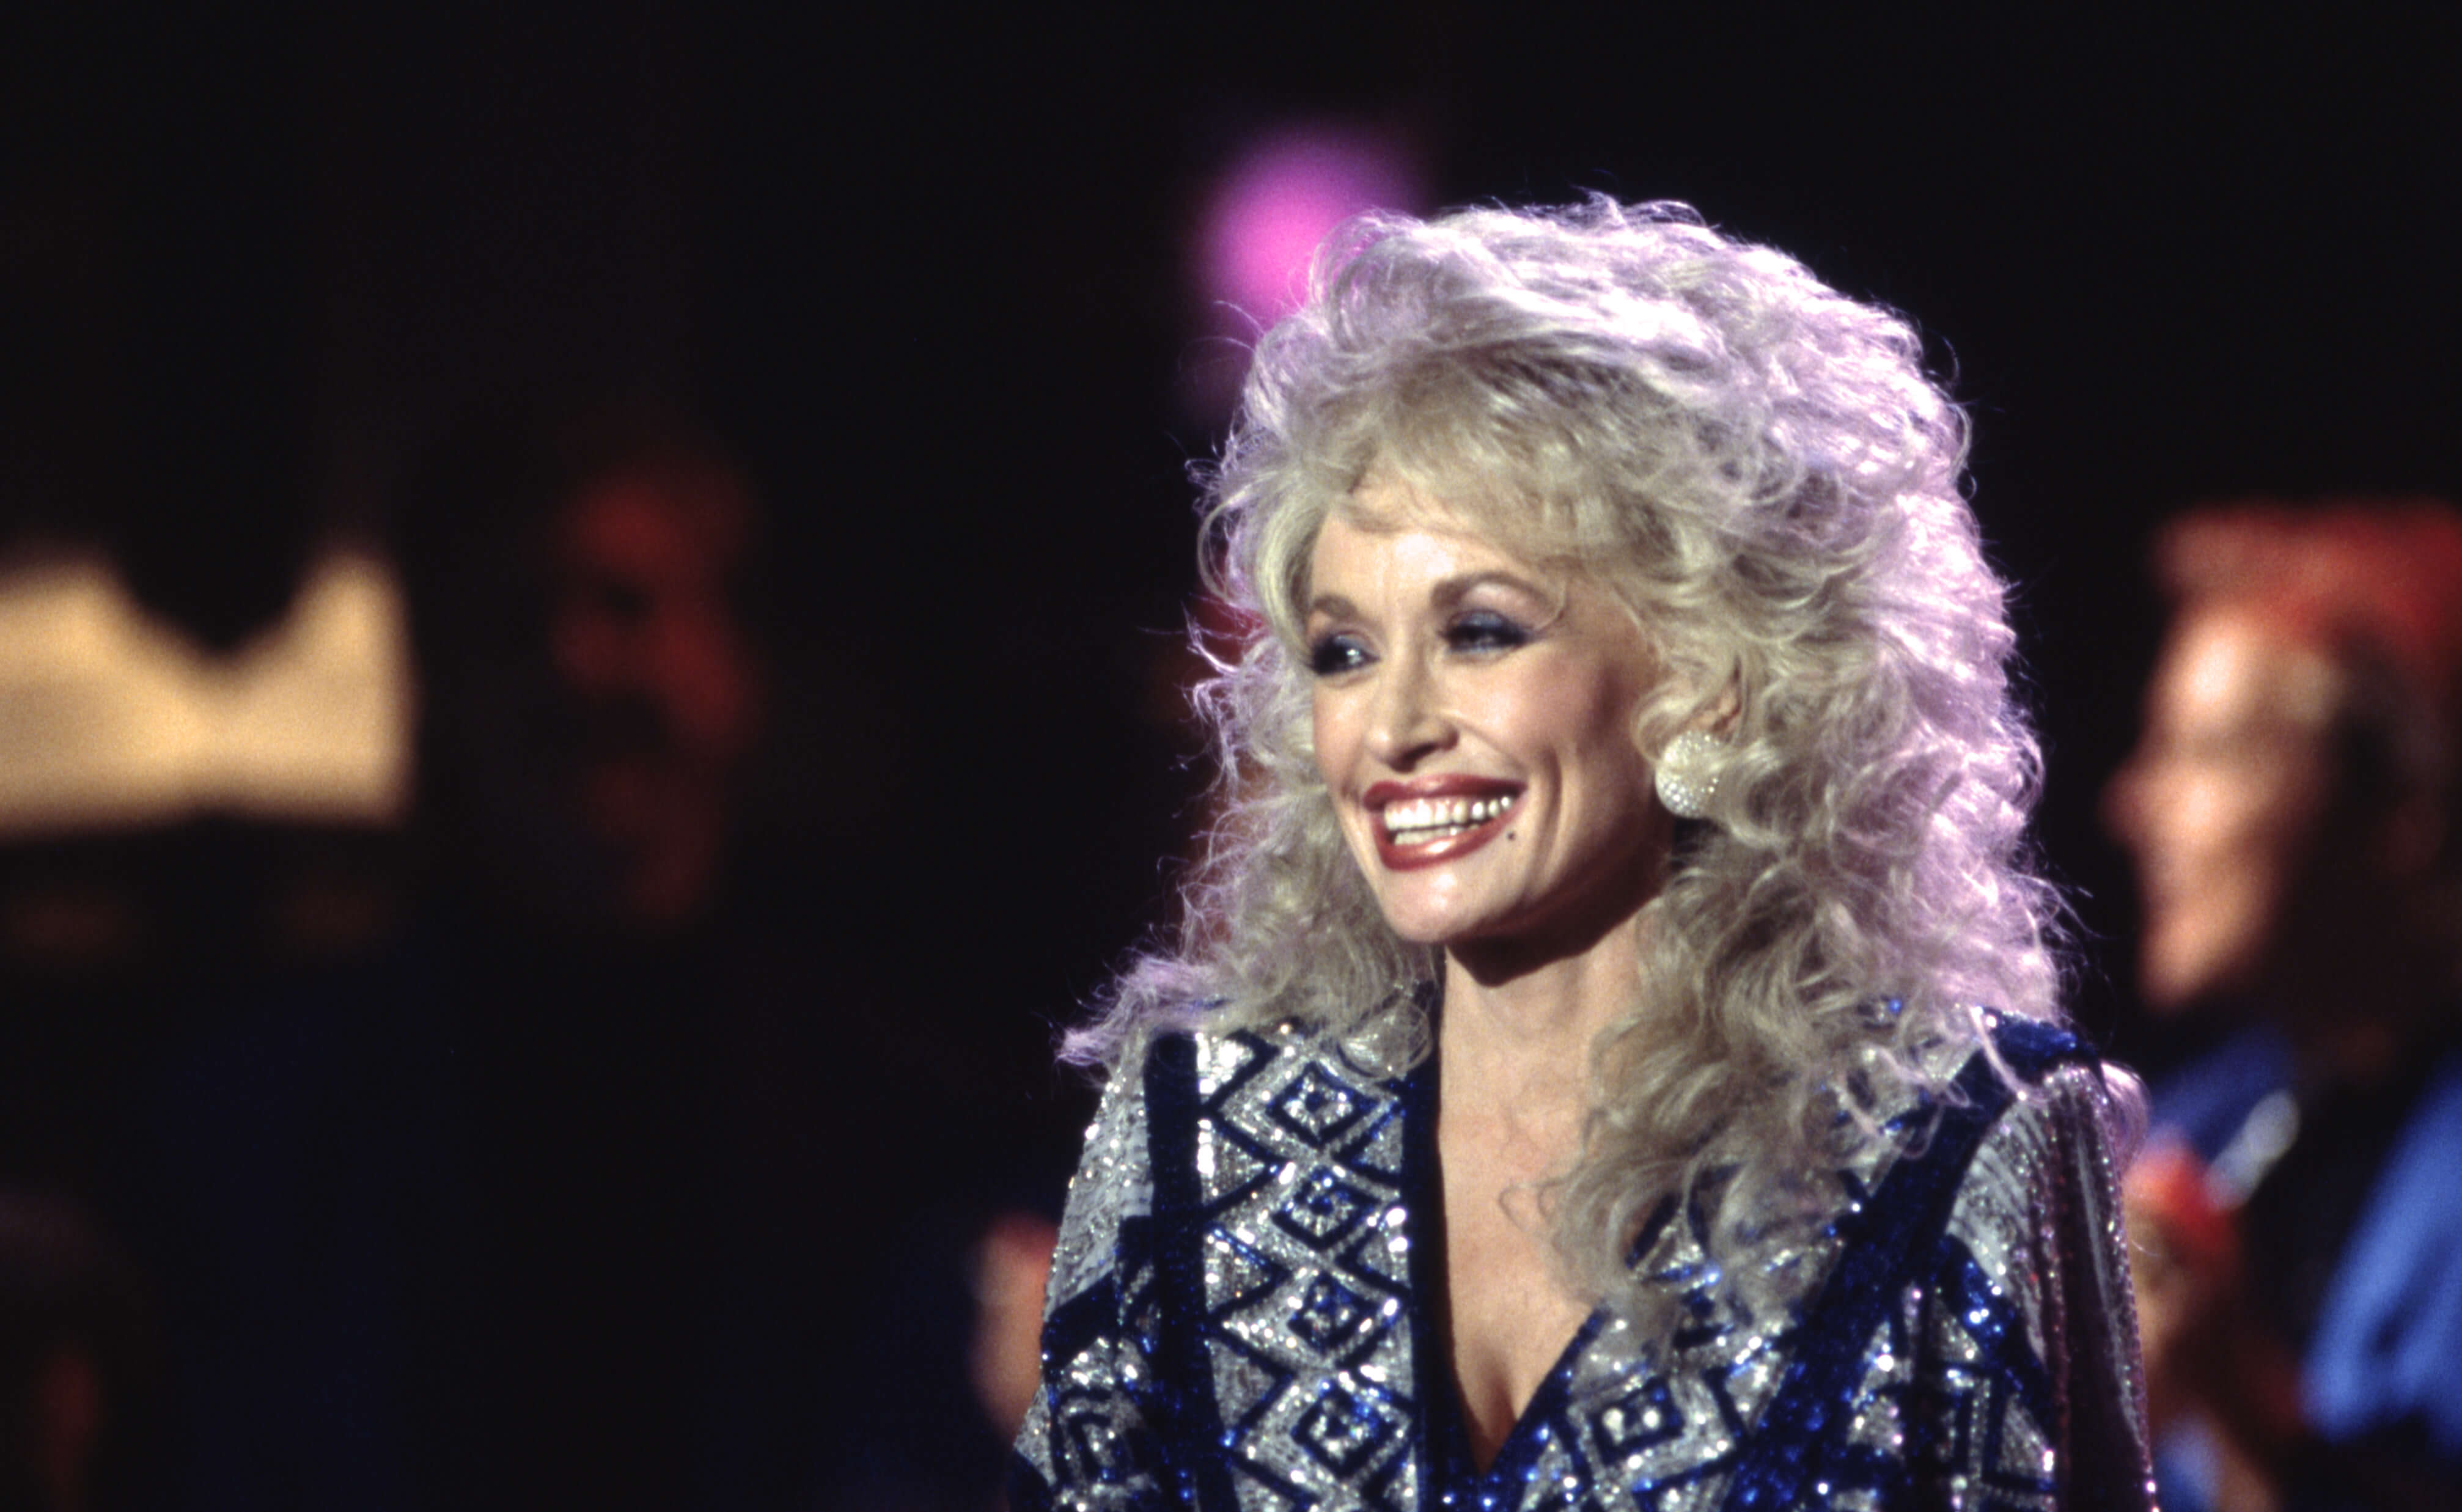 Dolly Parton in a black outfit.